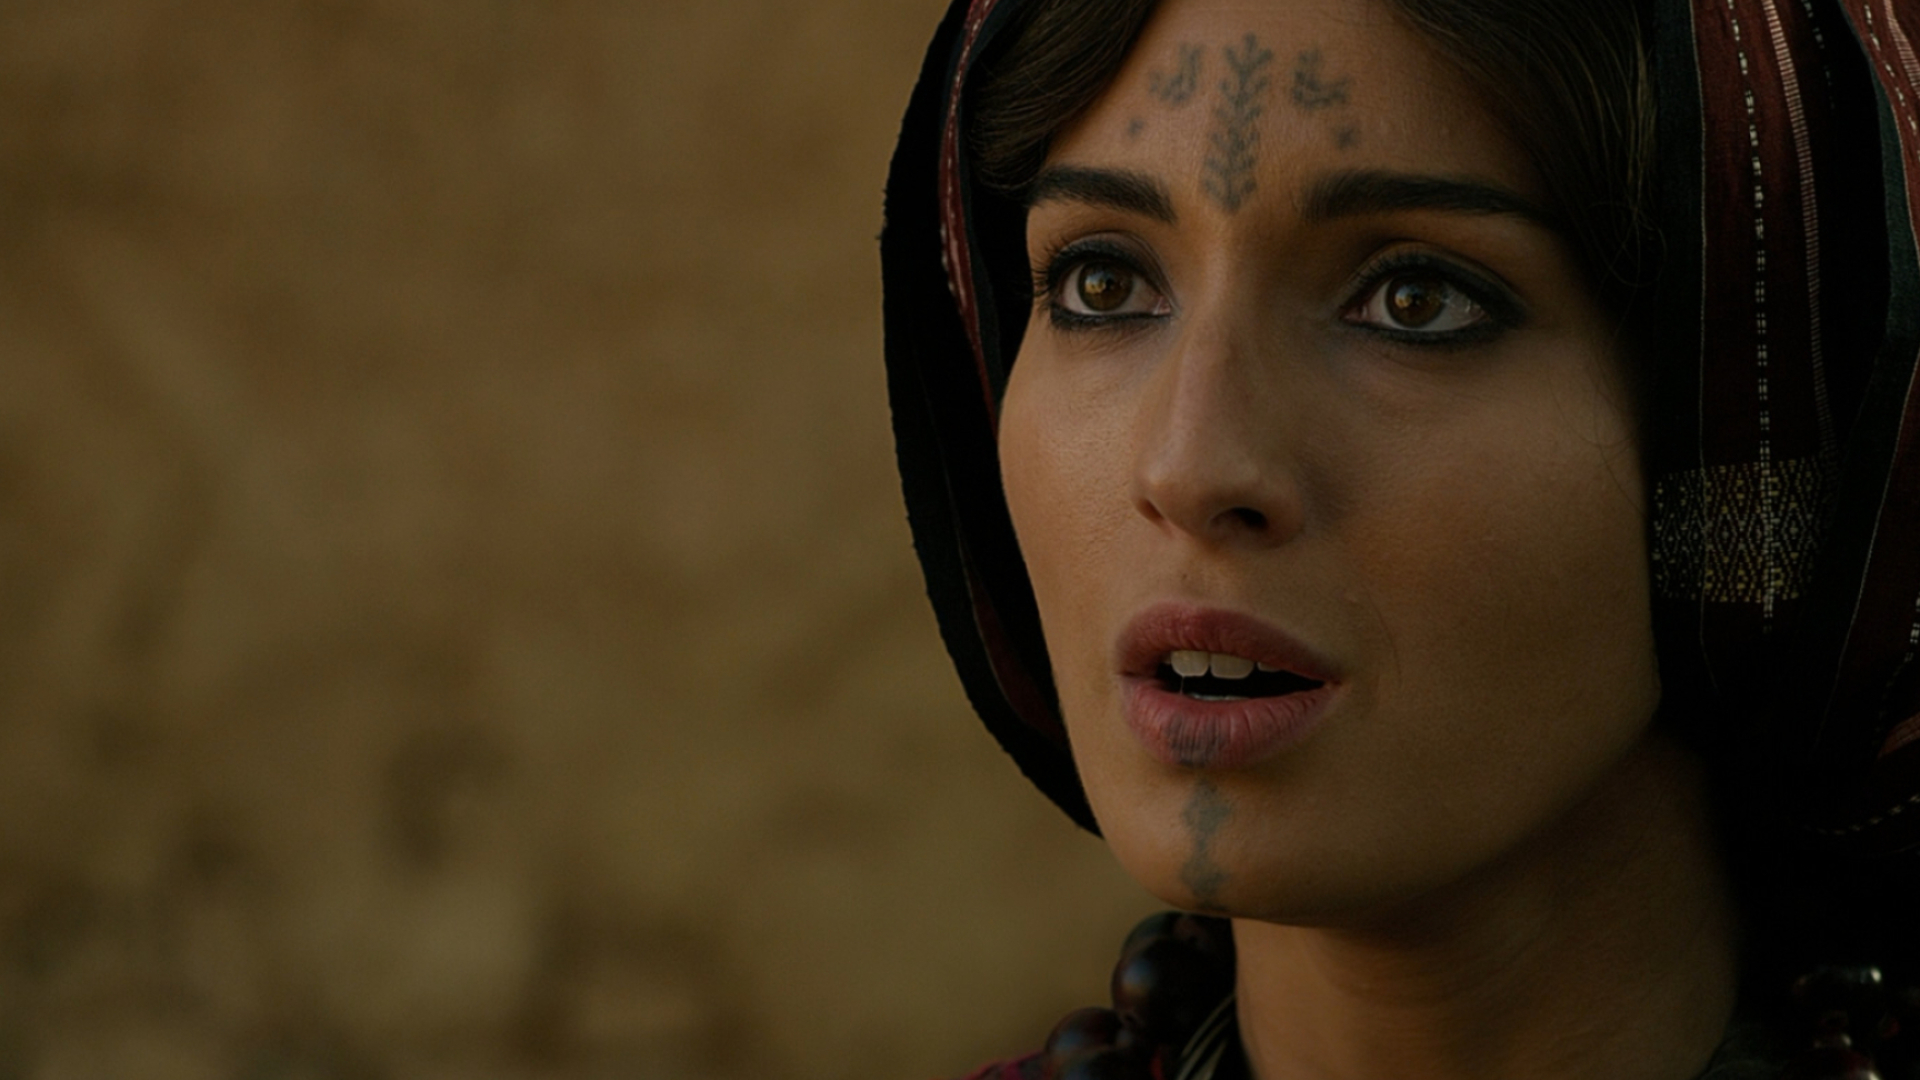 María Valverde: Exodus: Gods and Kings, Zipporah, Directed and produced by Ridley Scott. 1920x1080 Full HD Wallpaper.